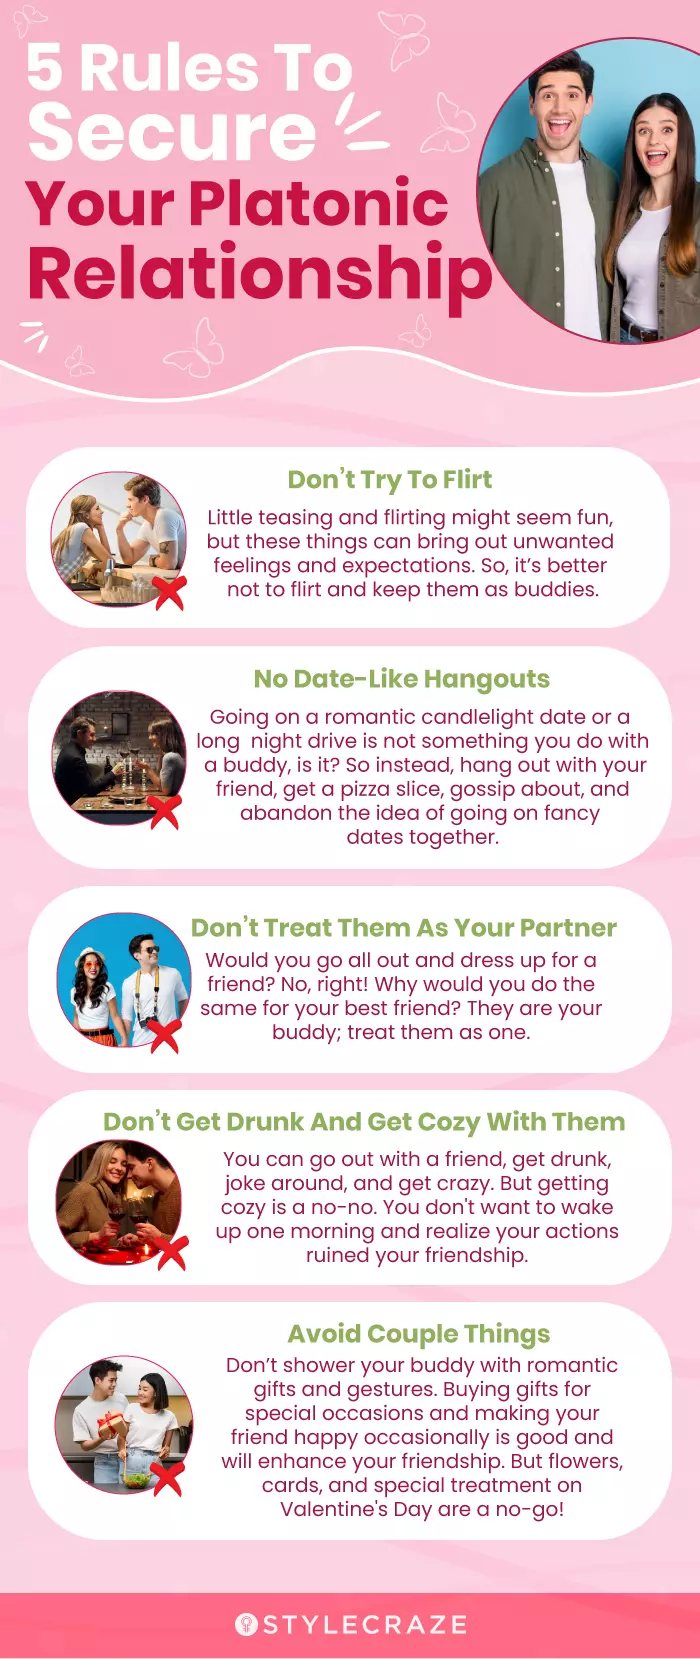 5 rules to secure your platonic relationship (infographic)